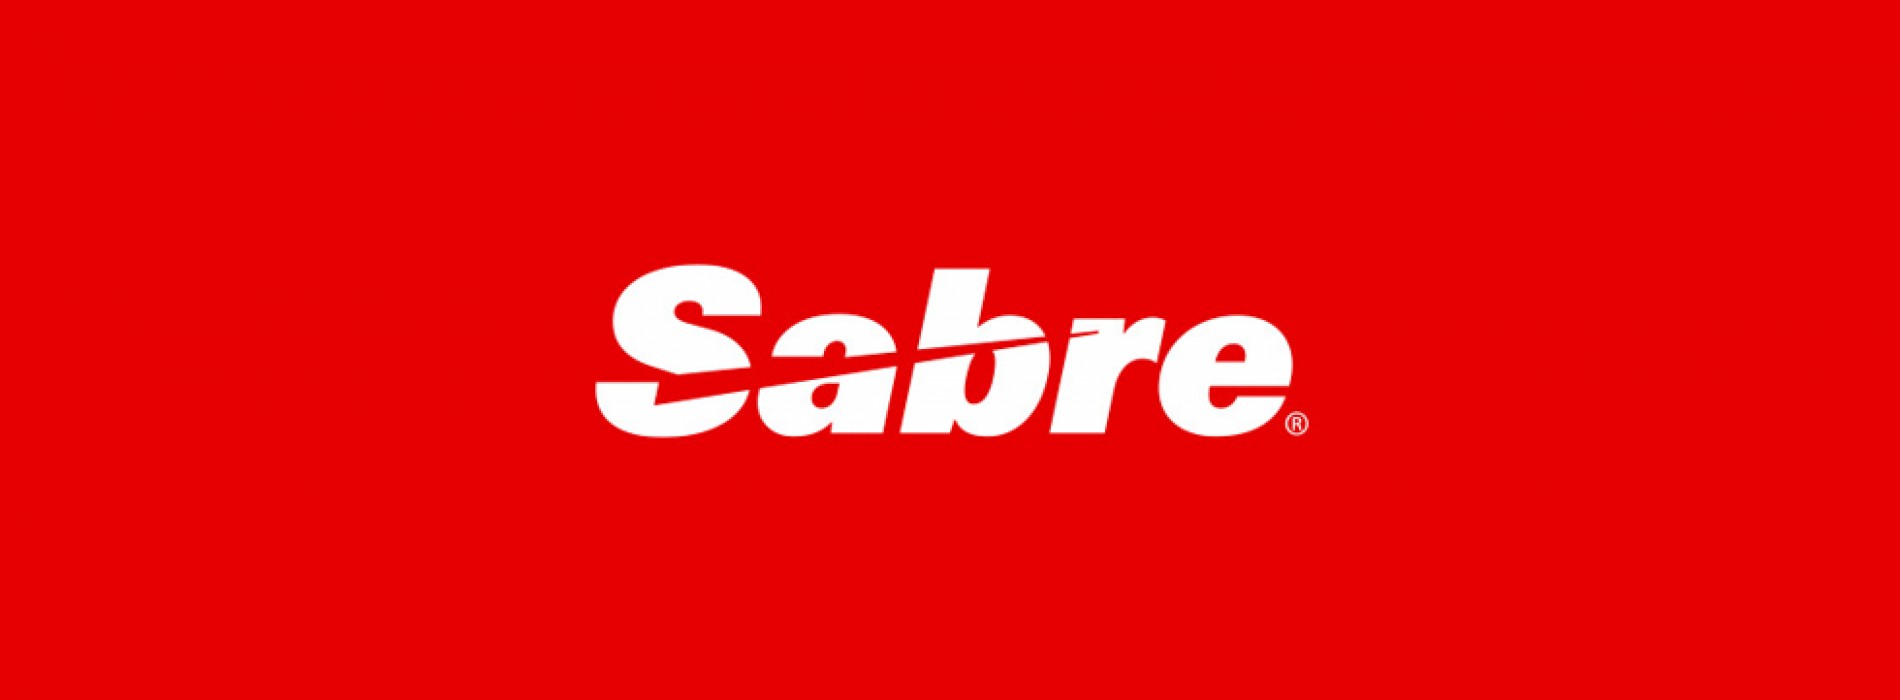 Global Hotel Alliance selects Sabre Hospitality Solutions as an alternative distribution provider